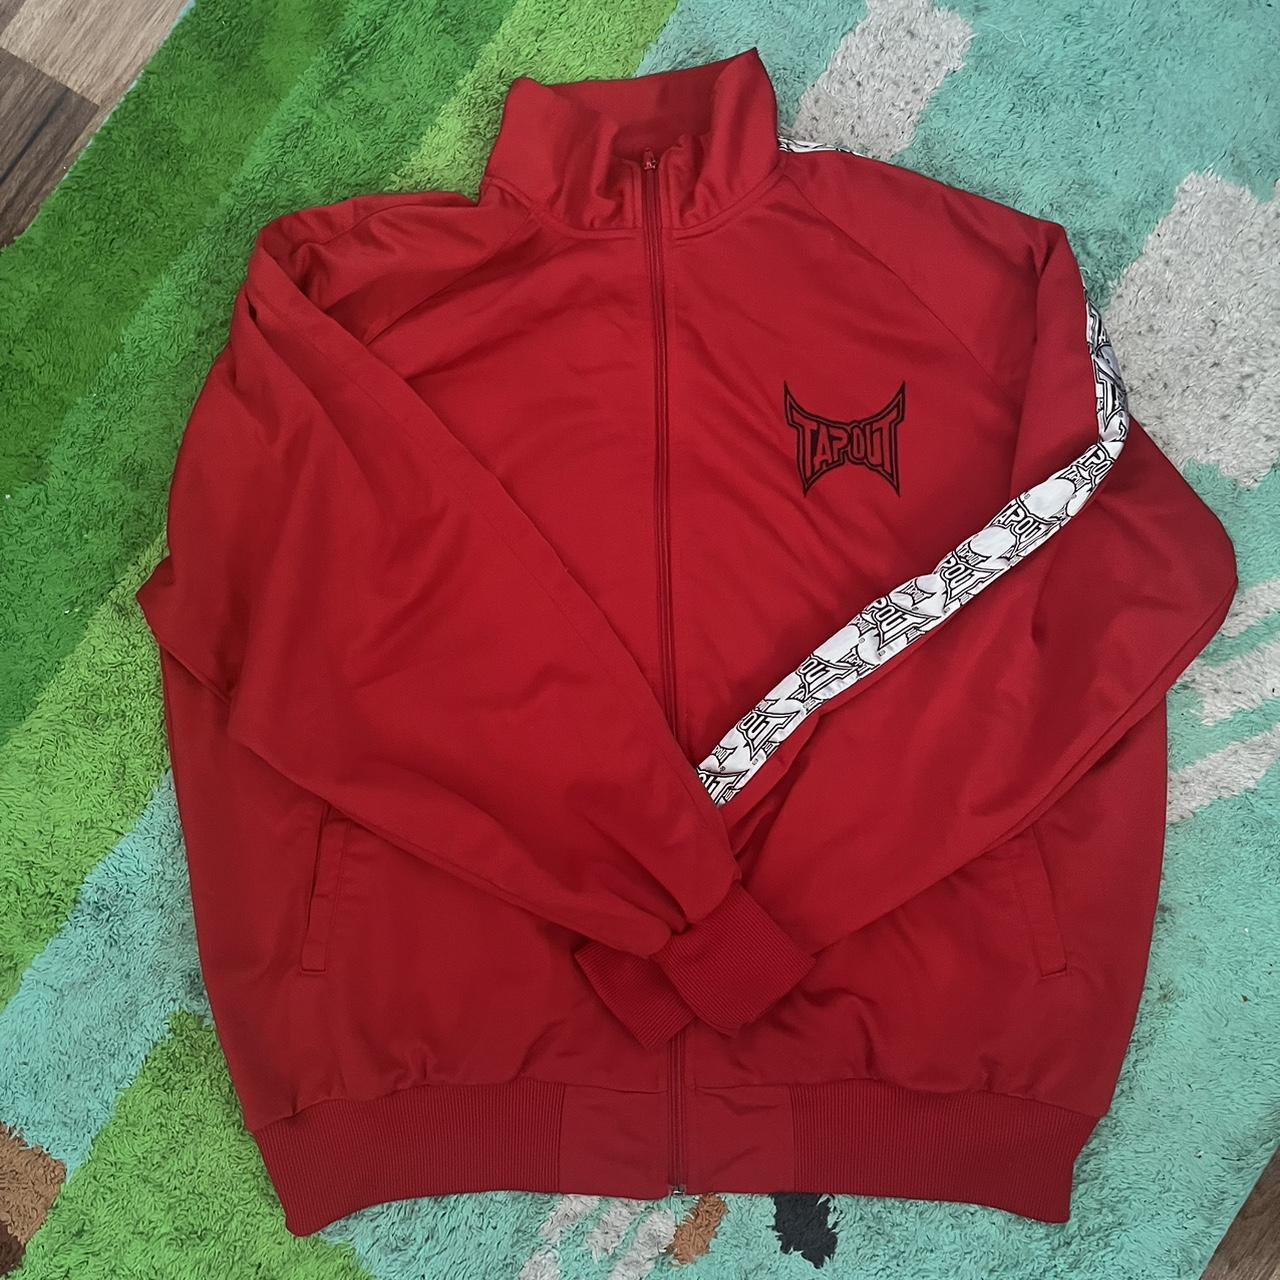 Tapout jacket 🔥👕👖 OFFERS WELCOME (DM BEFORE... - Depop